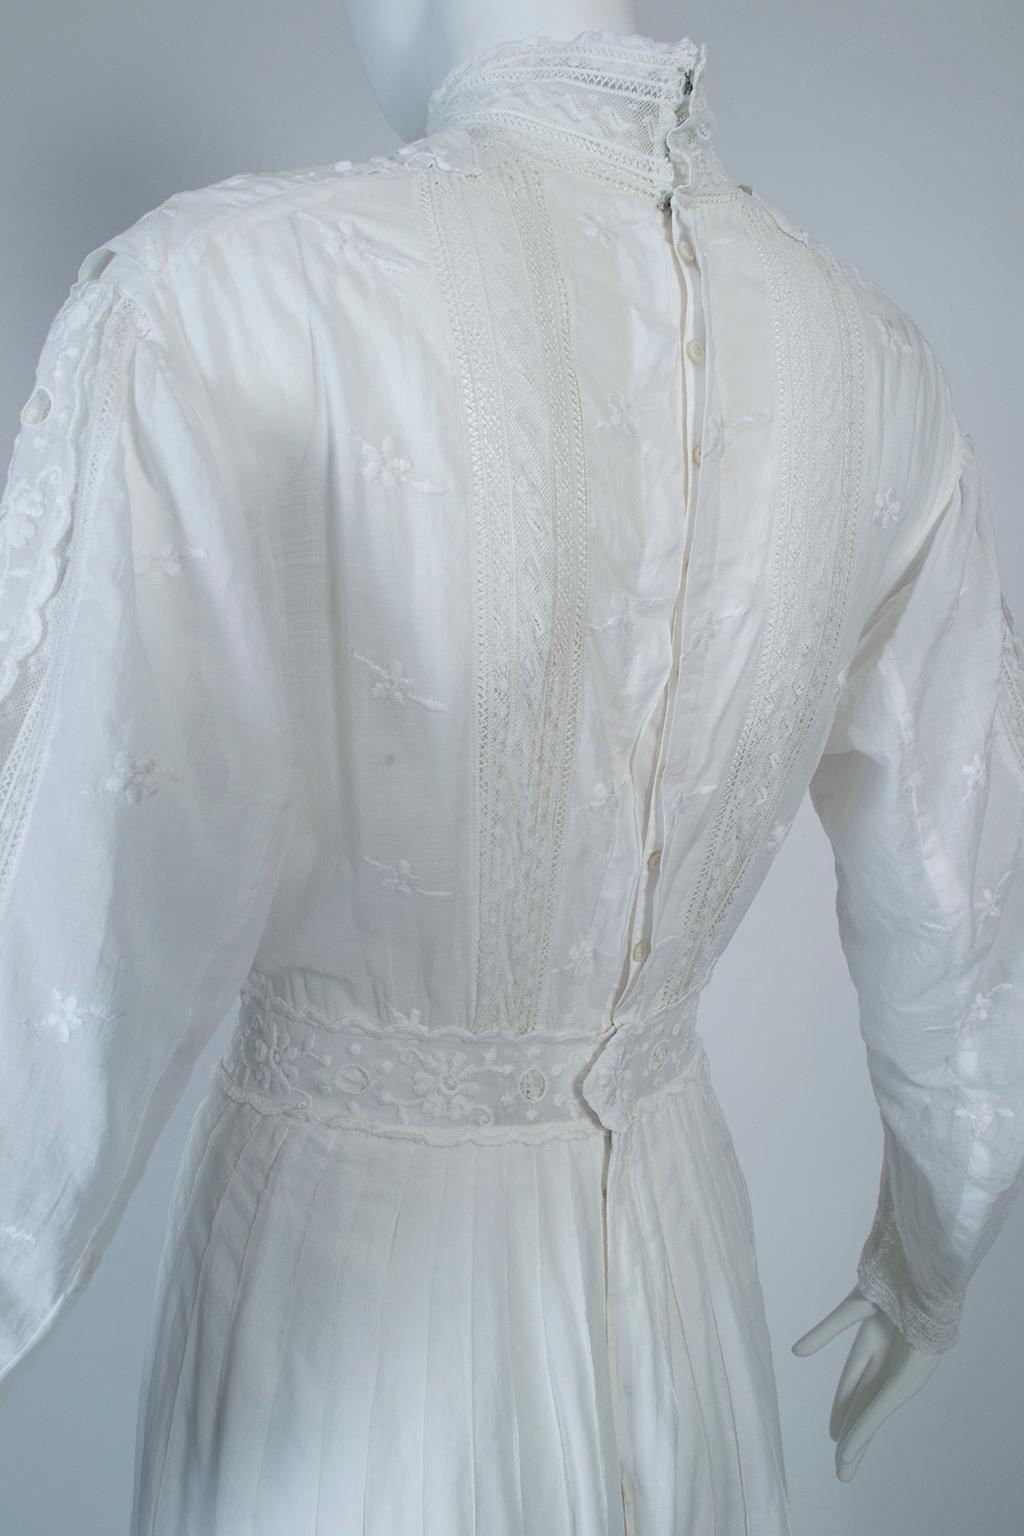 Women's Victorian White Eyelet and Lace Shoulder Pleat Afternoon Tea Dress - M, 1880s